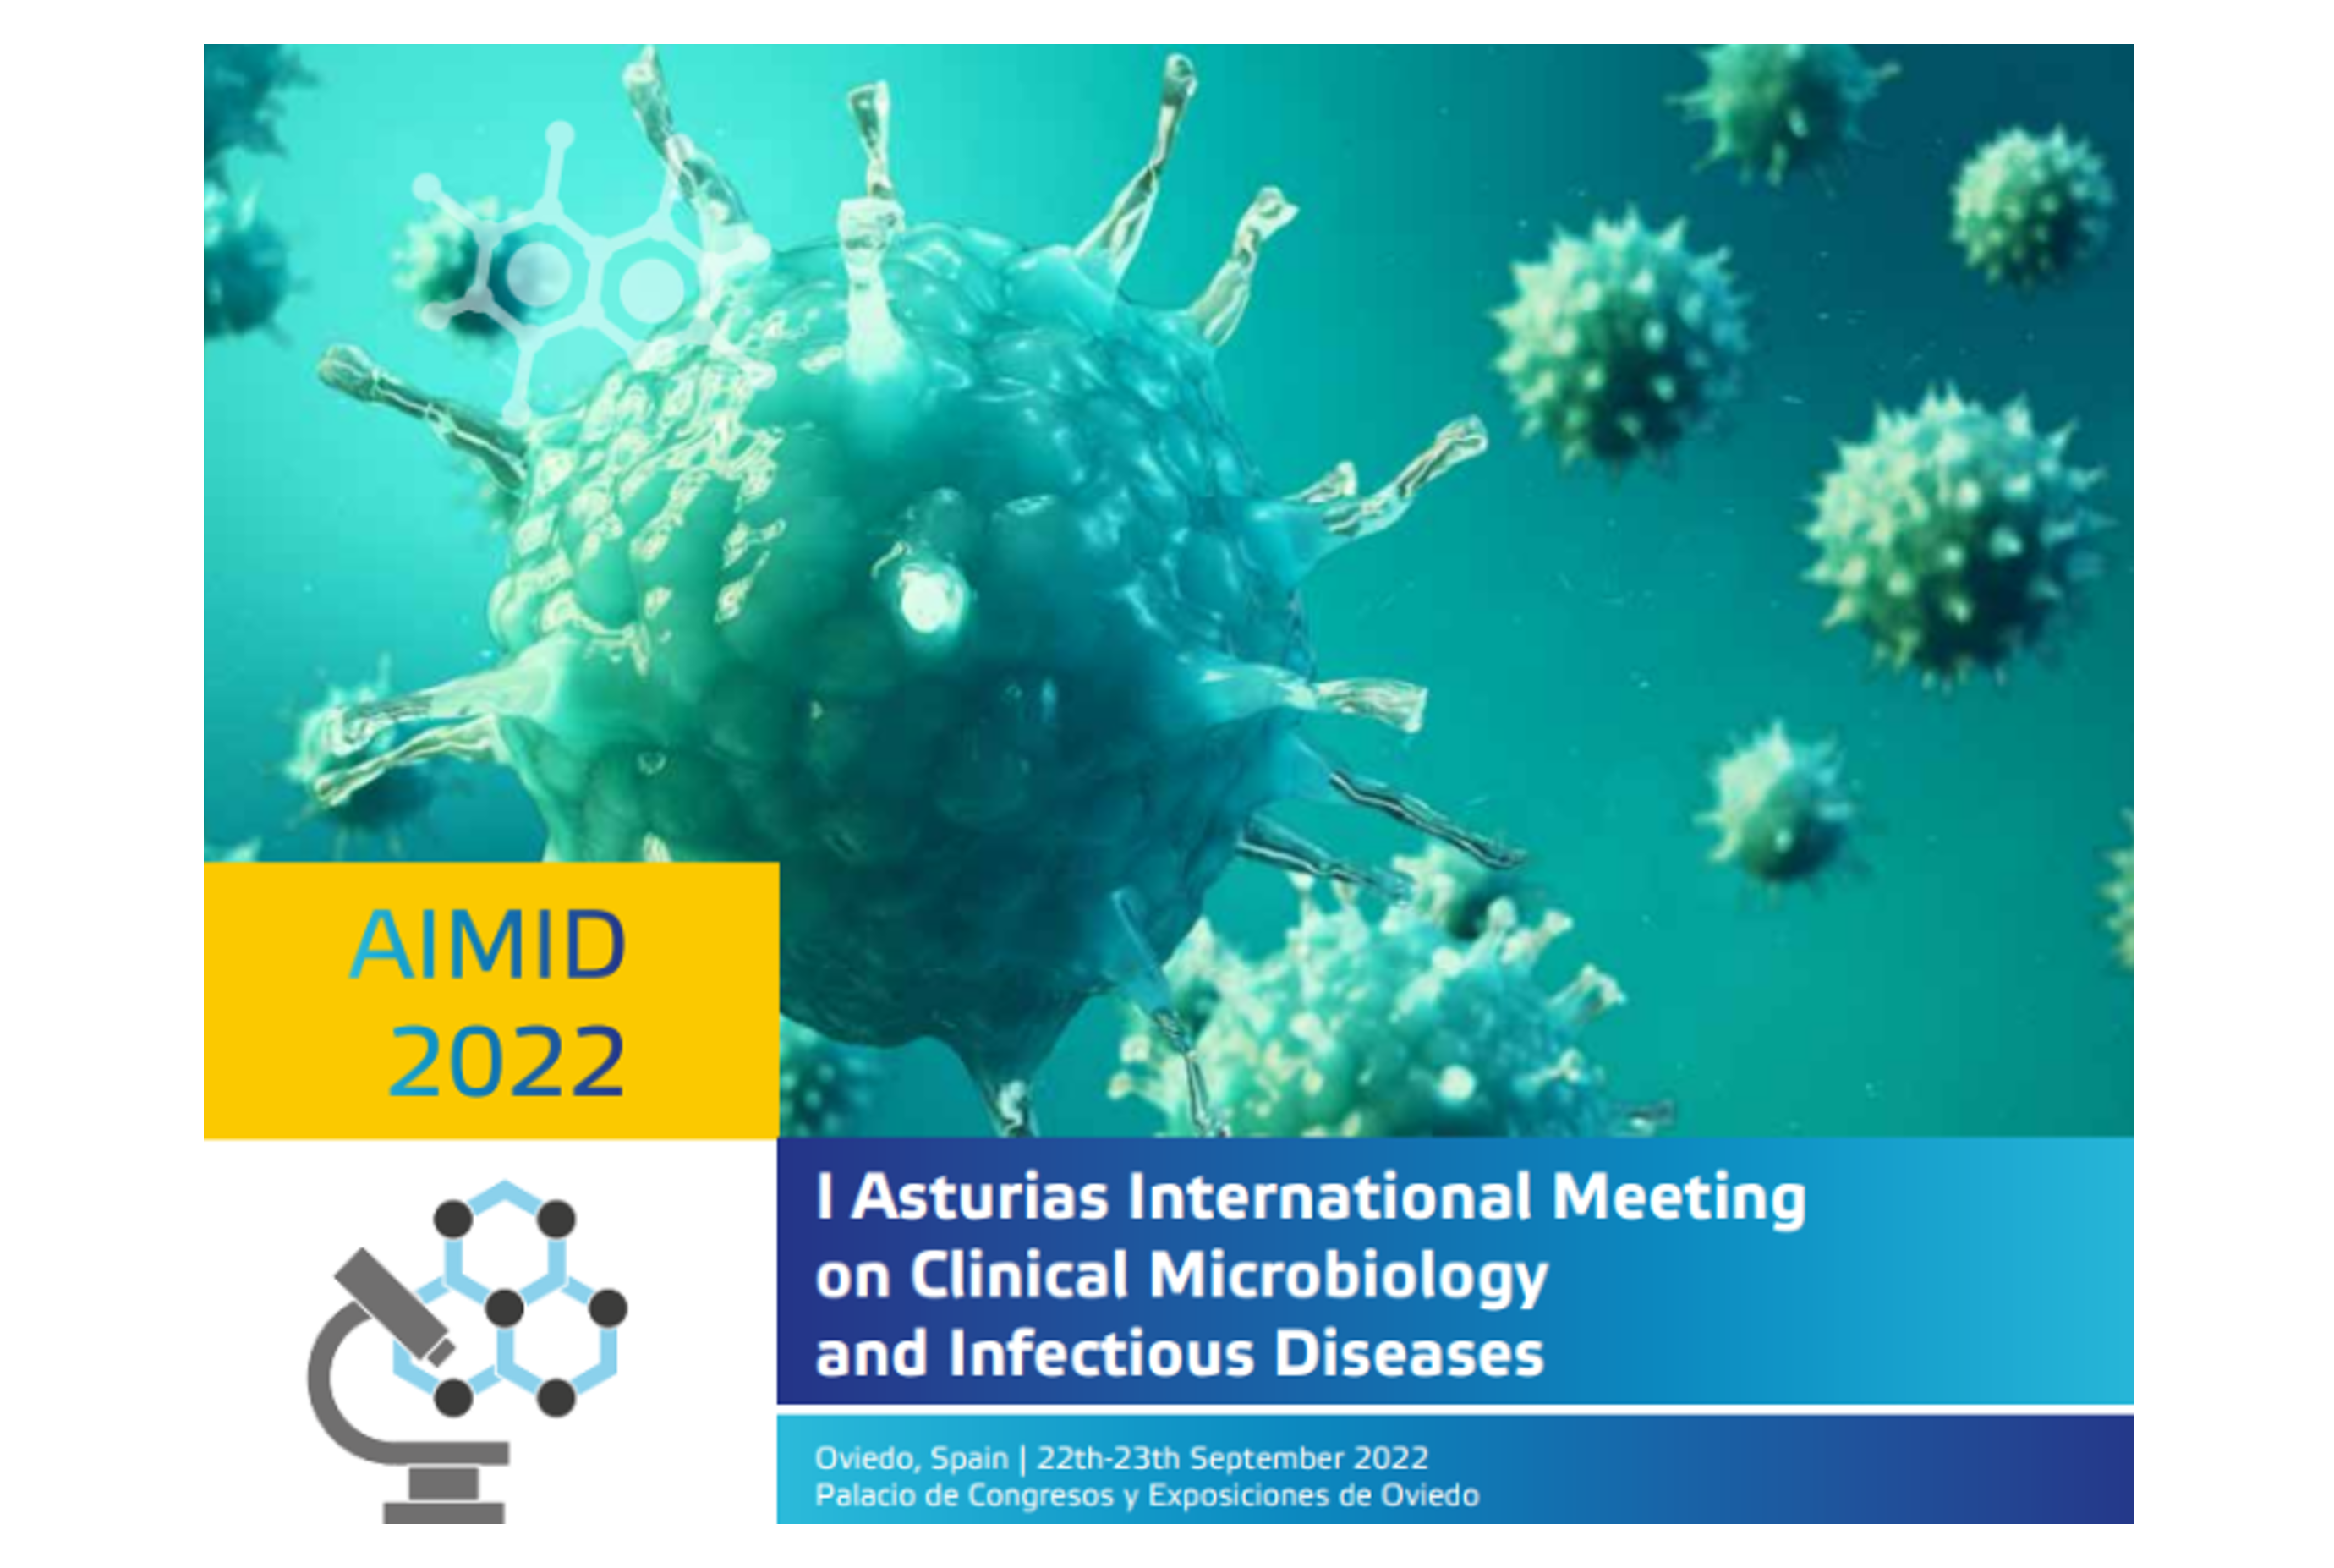 Microviable Therapeutics participará en AIMID 2022 (I Asturias International Meeting on Clinical Microbiology and Infectious Disease).